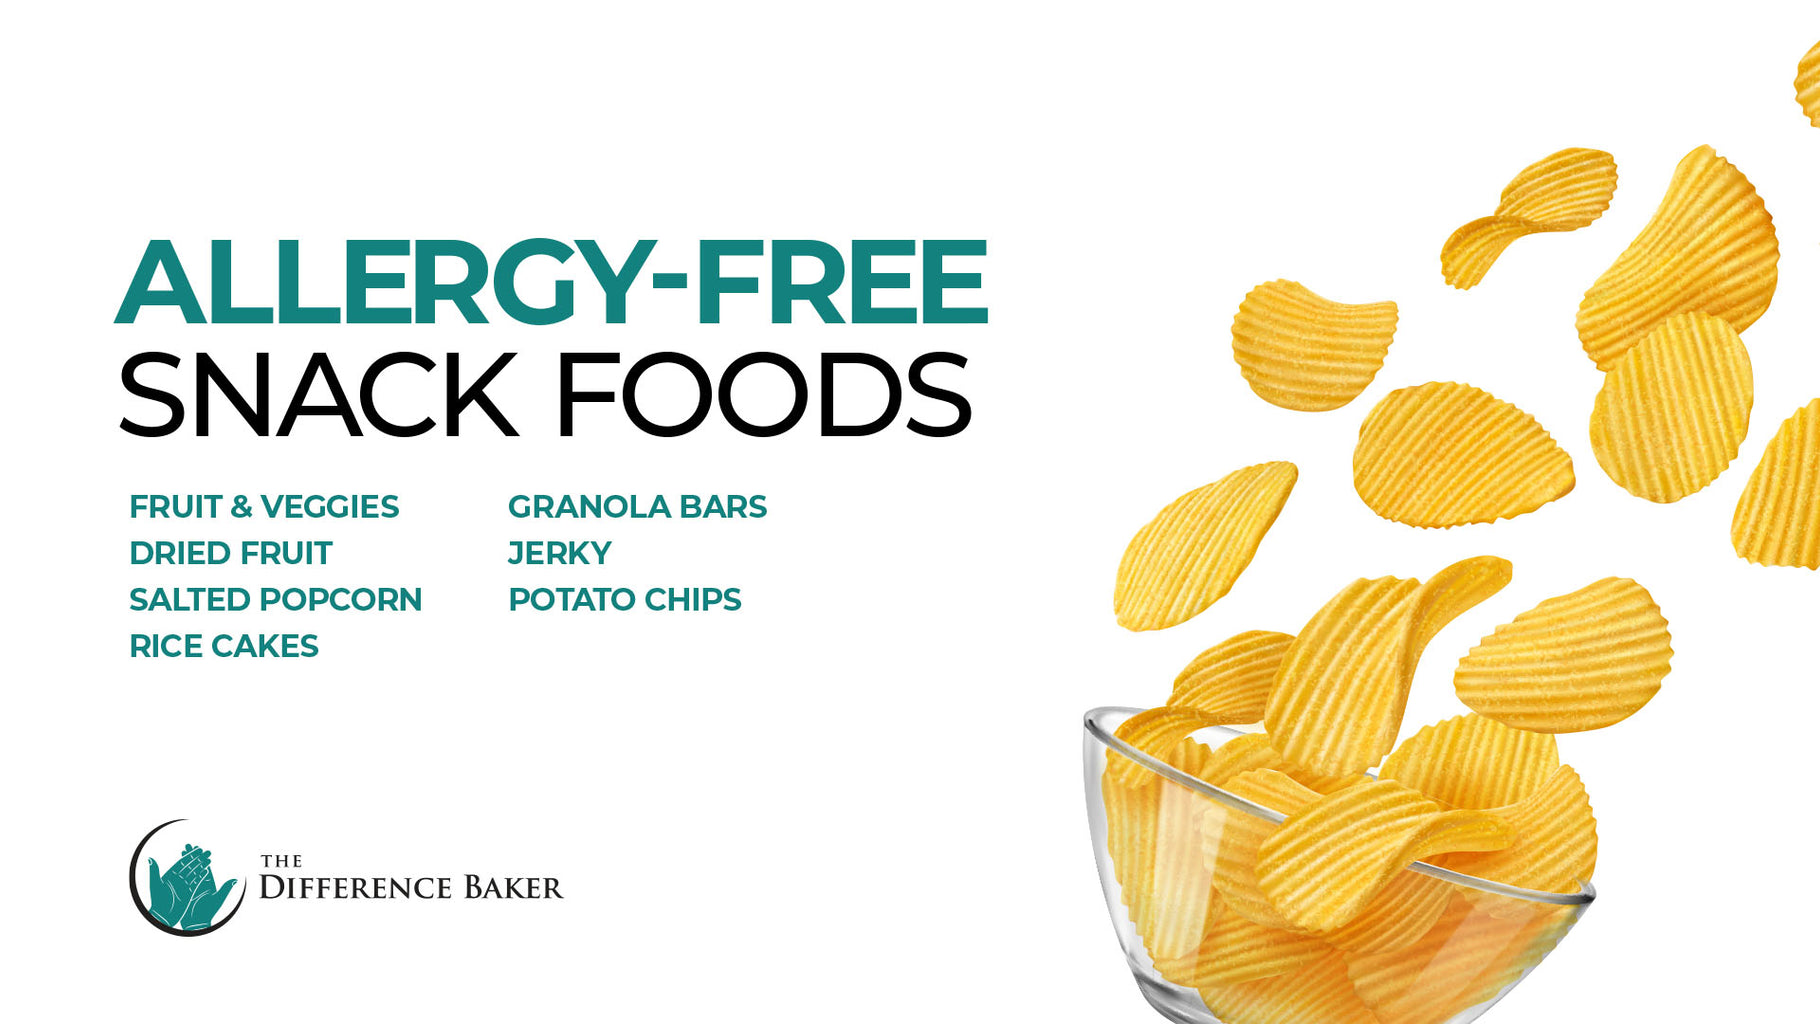 Allergy-Free Snack Foods. Listed: fruit & veggies, dried fruit, salted popcorn, rice cakes, granola bars, jerky, potato chips